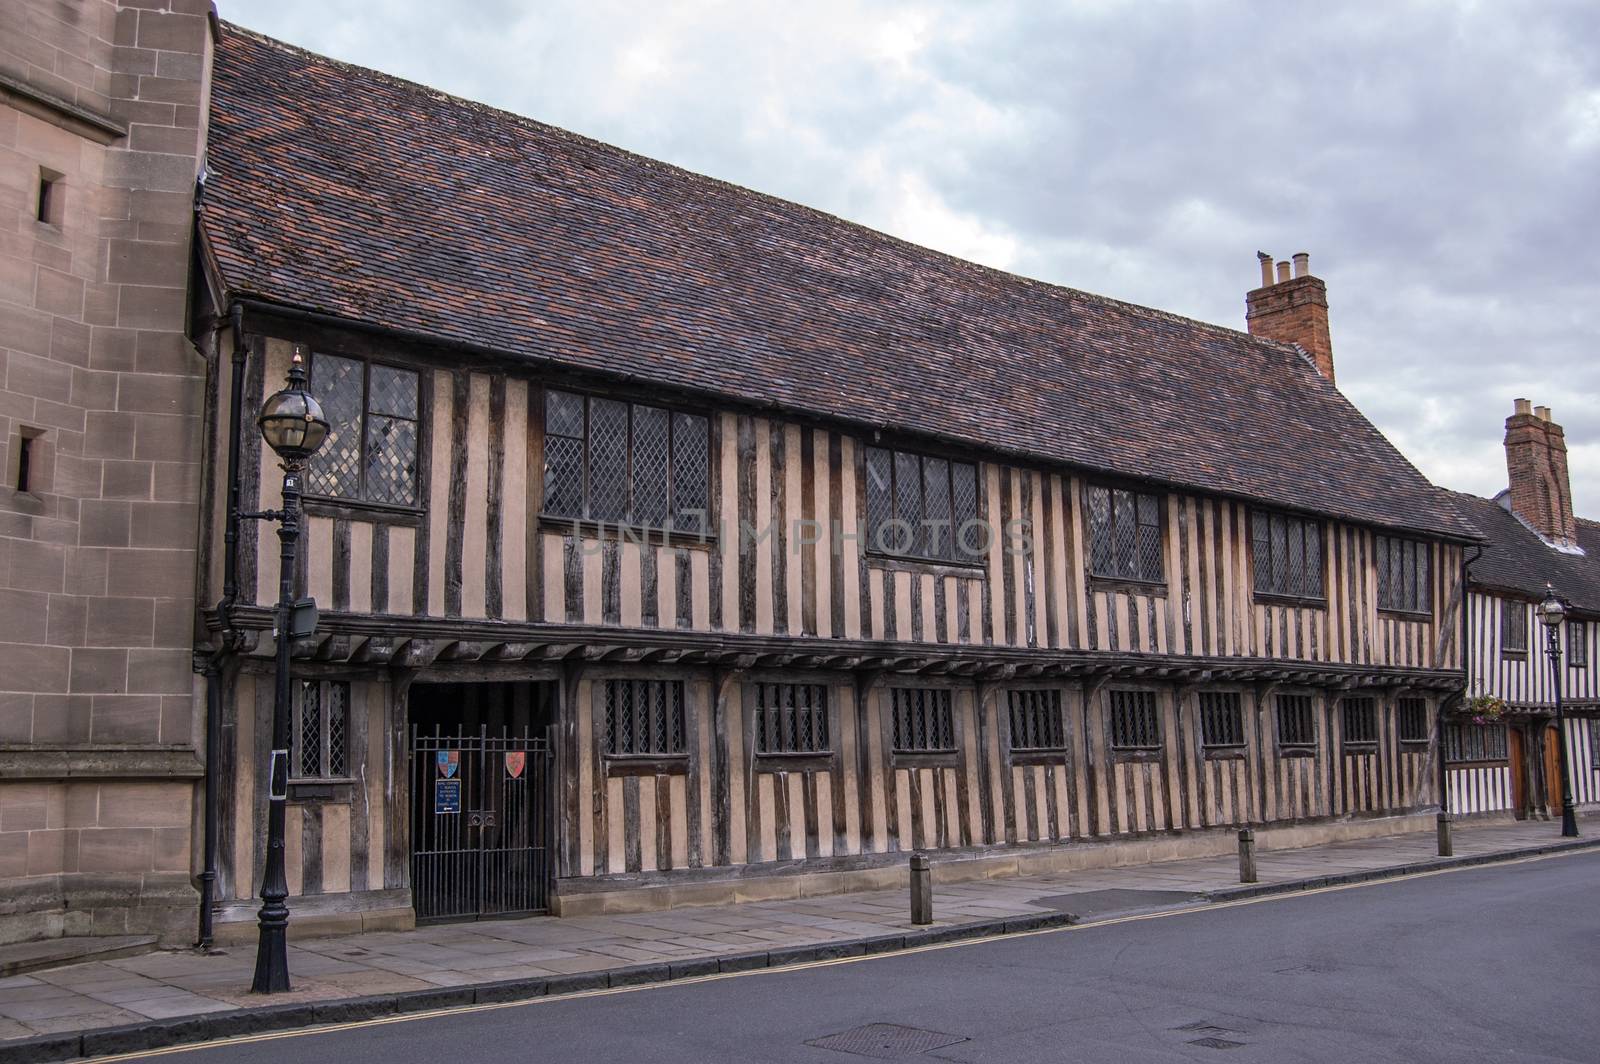 The historic King Edward VI school in Stratford Upon Avon, Warwickshire. Dating from the thirteenth century it is believed William Shakespeare was a pupil here.